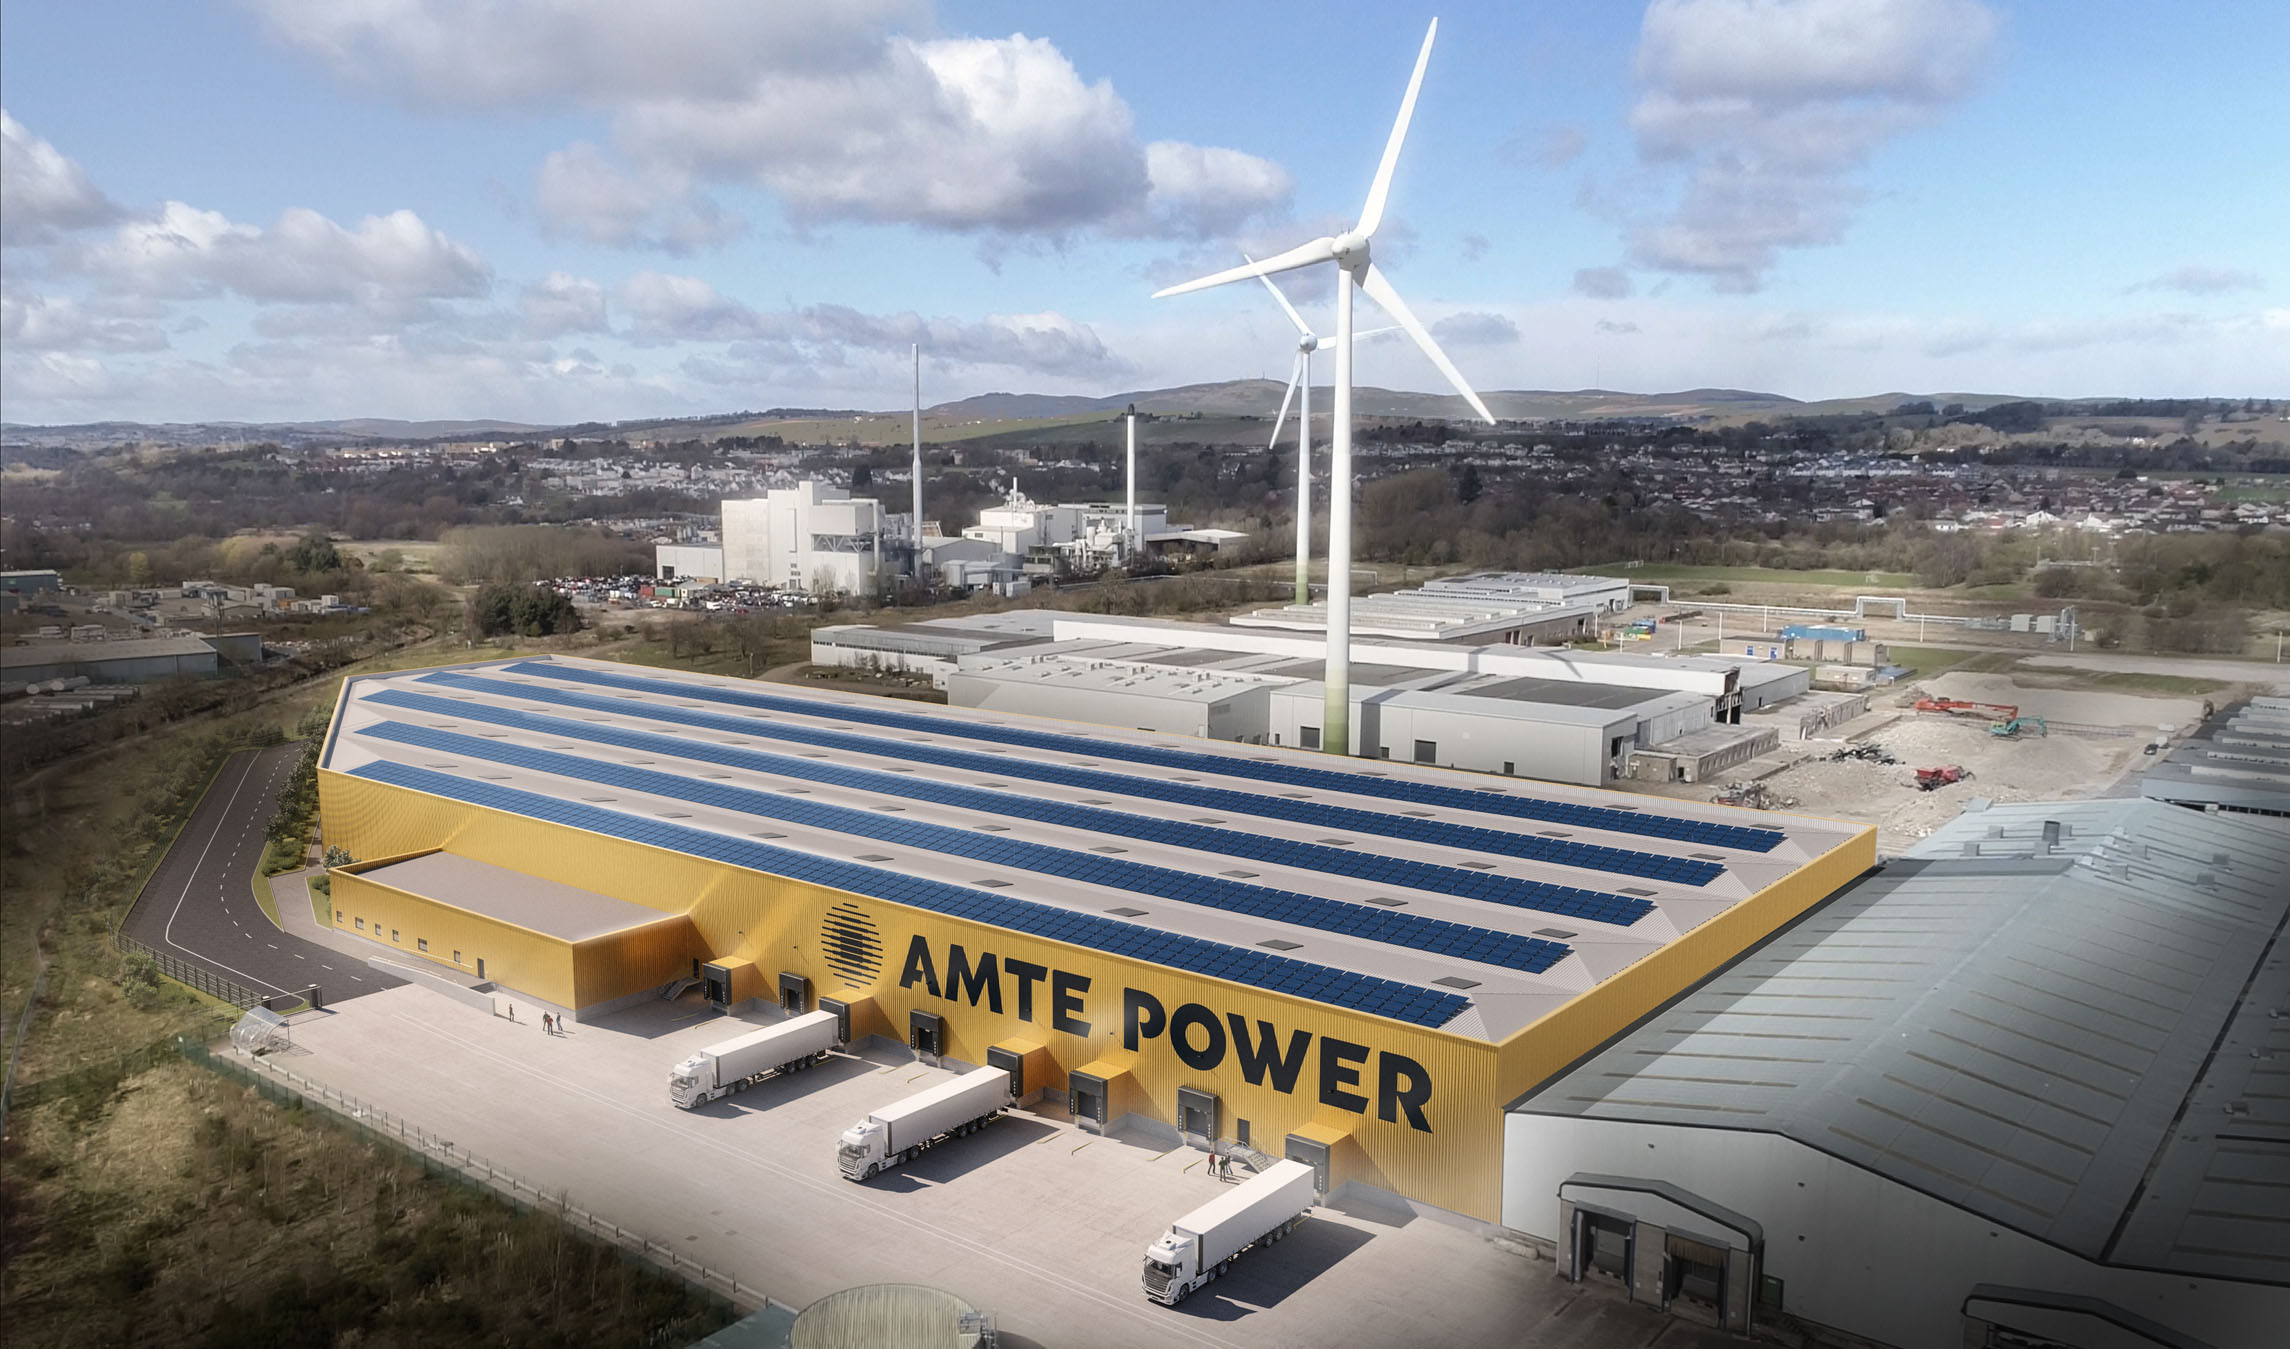 Talks underway with potential buyer for AMTE Power